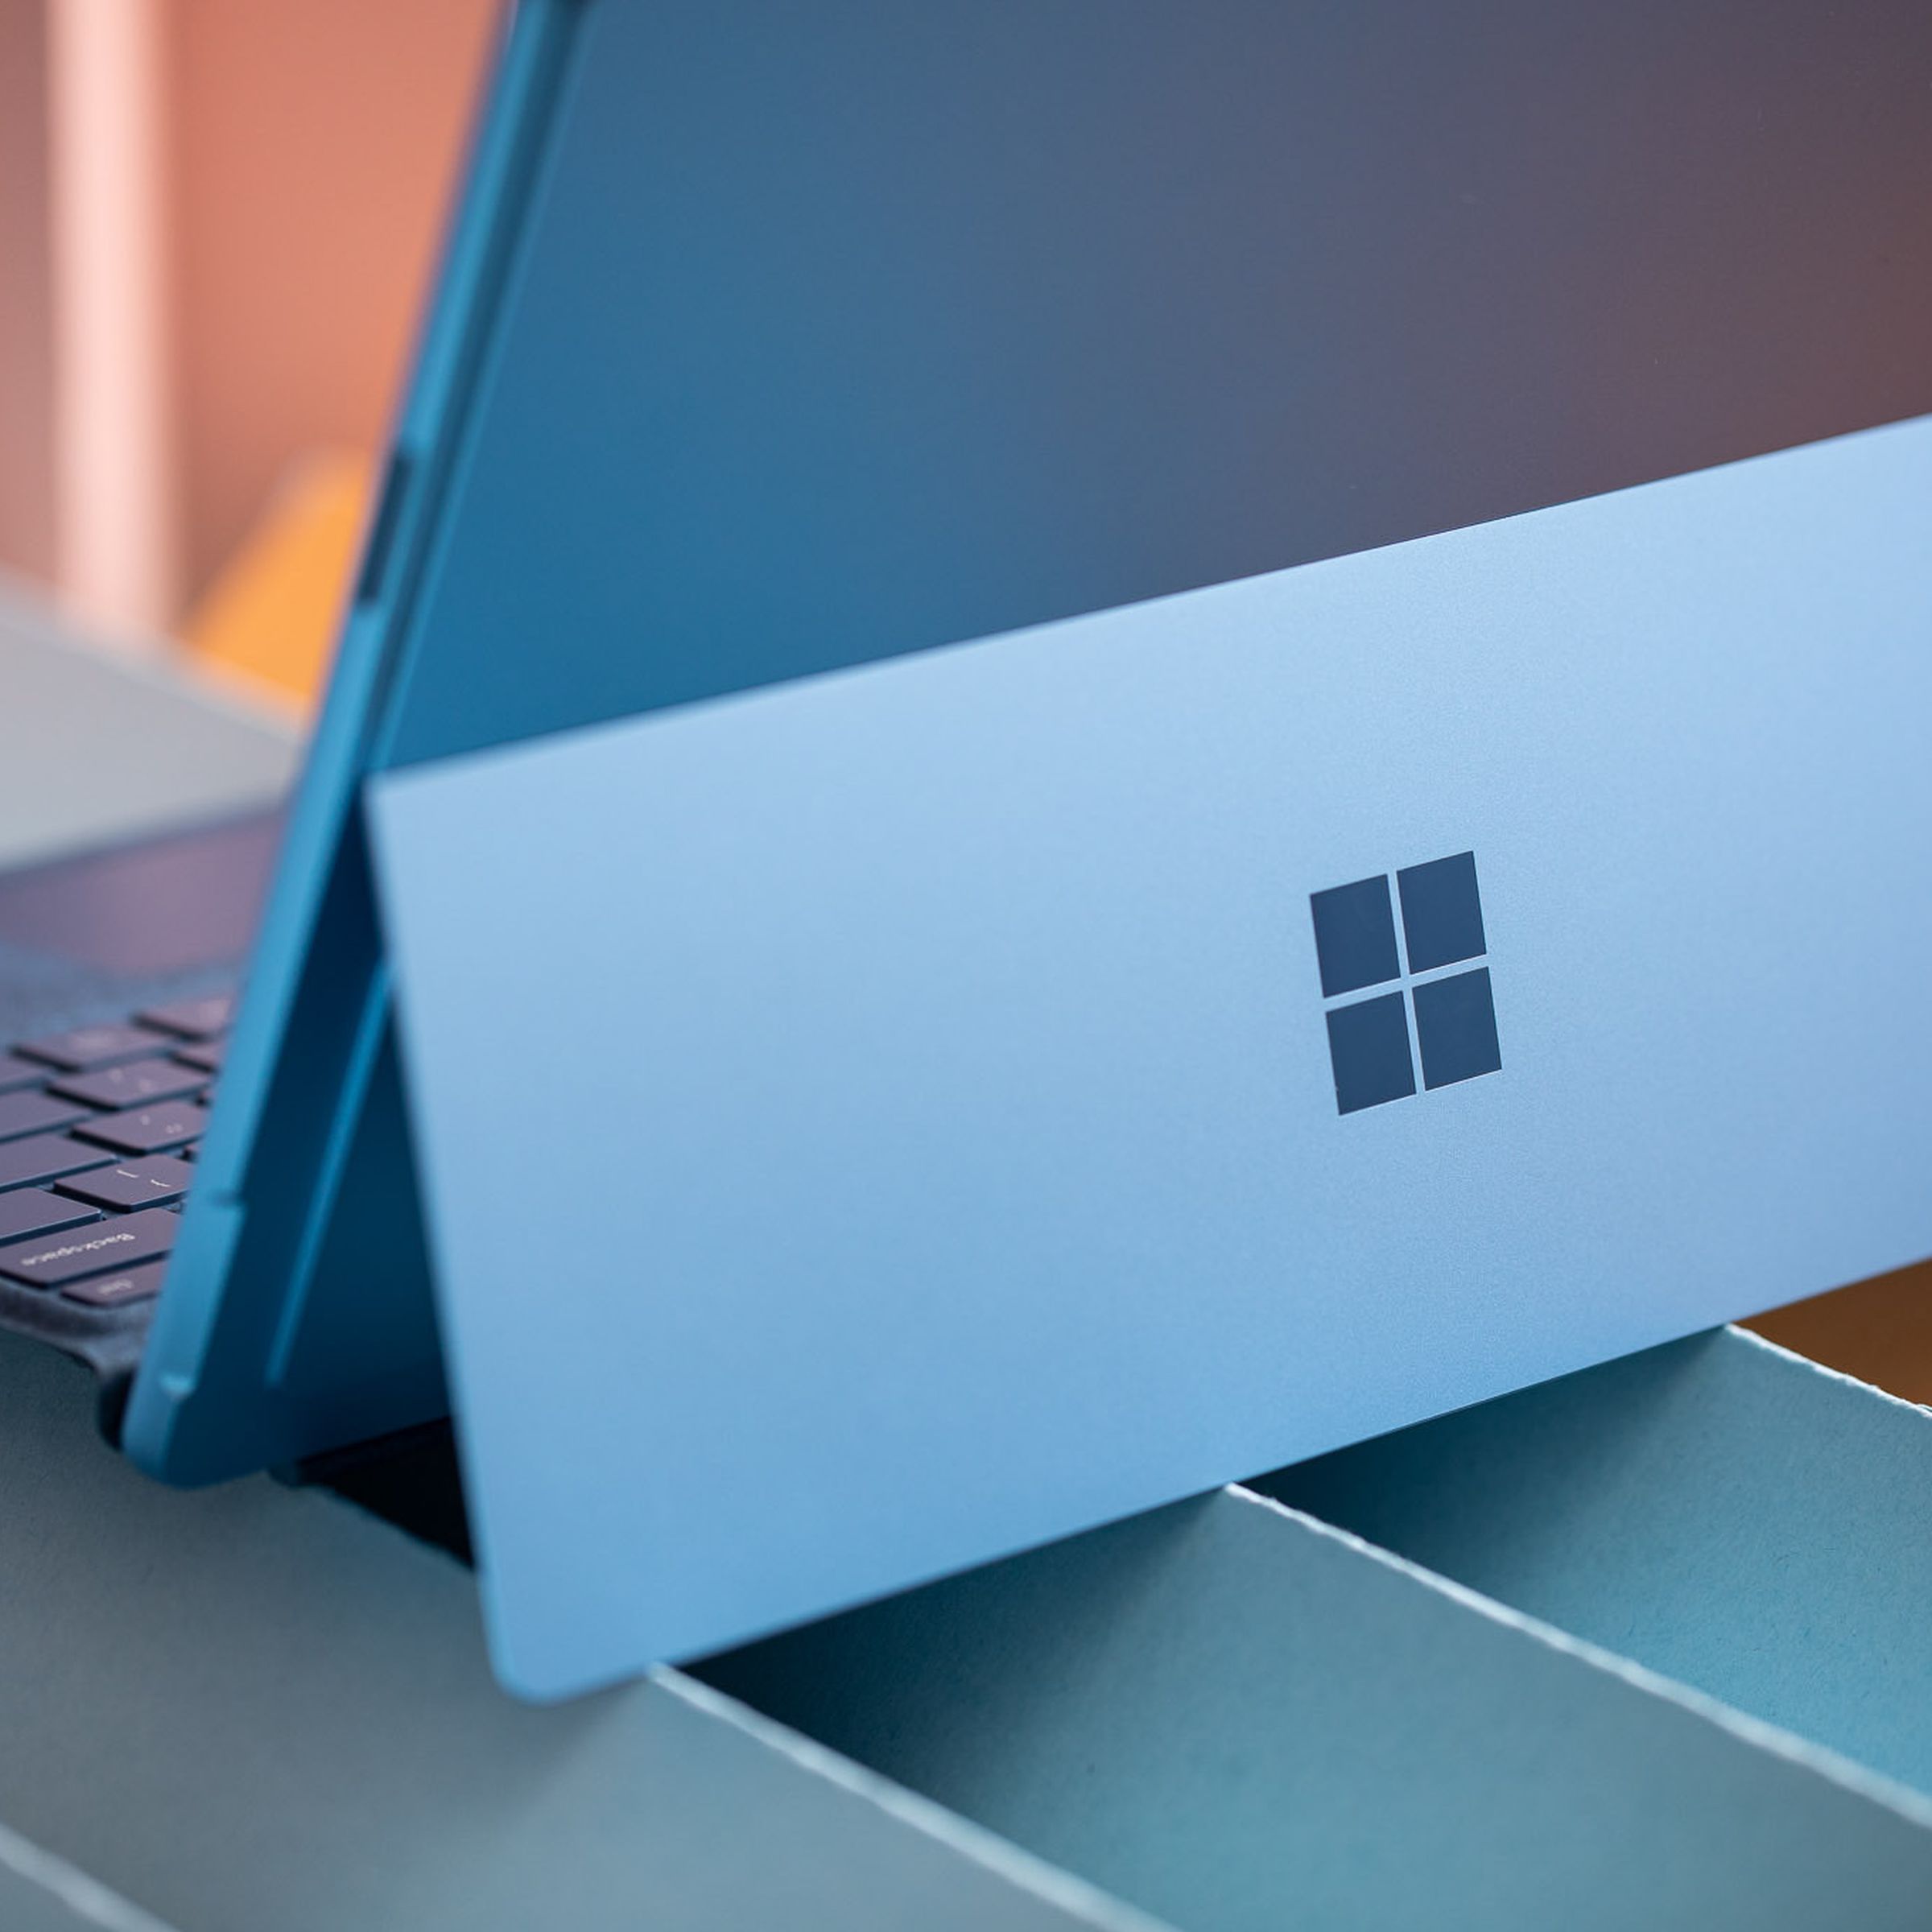 The Surface Pro 9 in laptop mode seen from beind.